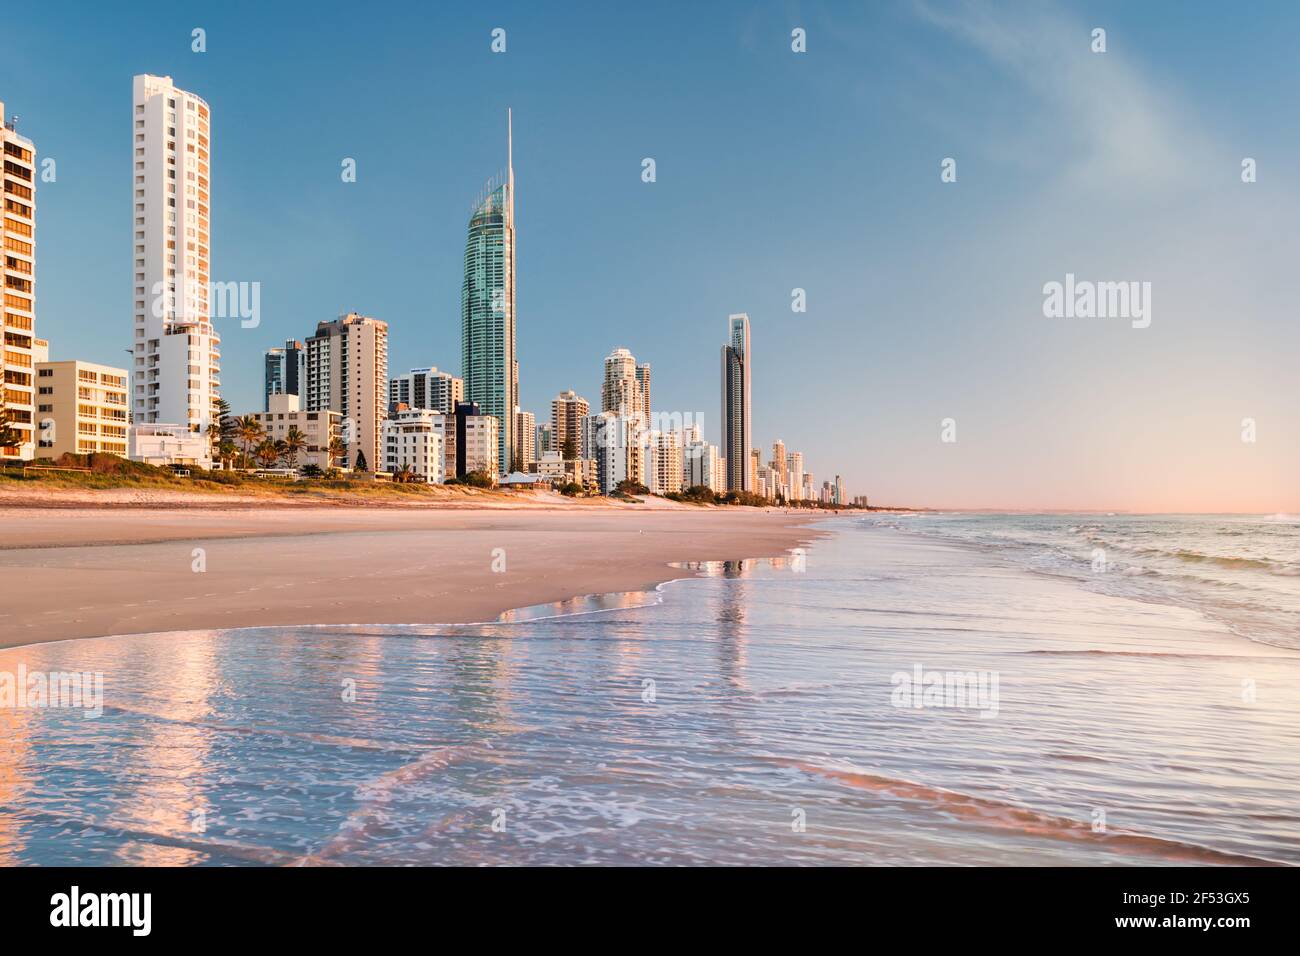 Early morning, Surfers Paradise Beach. This popular beach is on the Gold Coast, Queensland, Australia and is popular with tourists and locals alike. Stock Photo